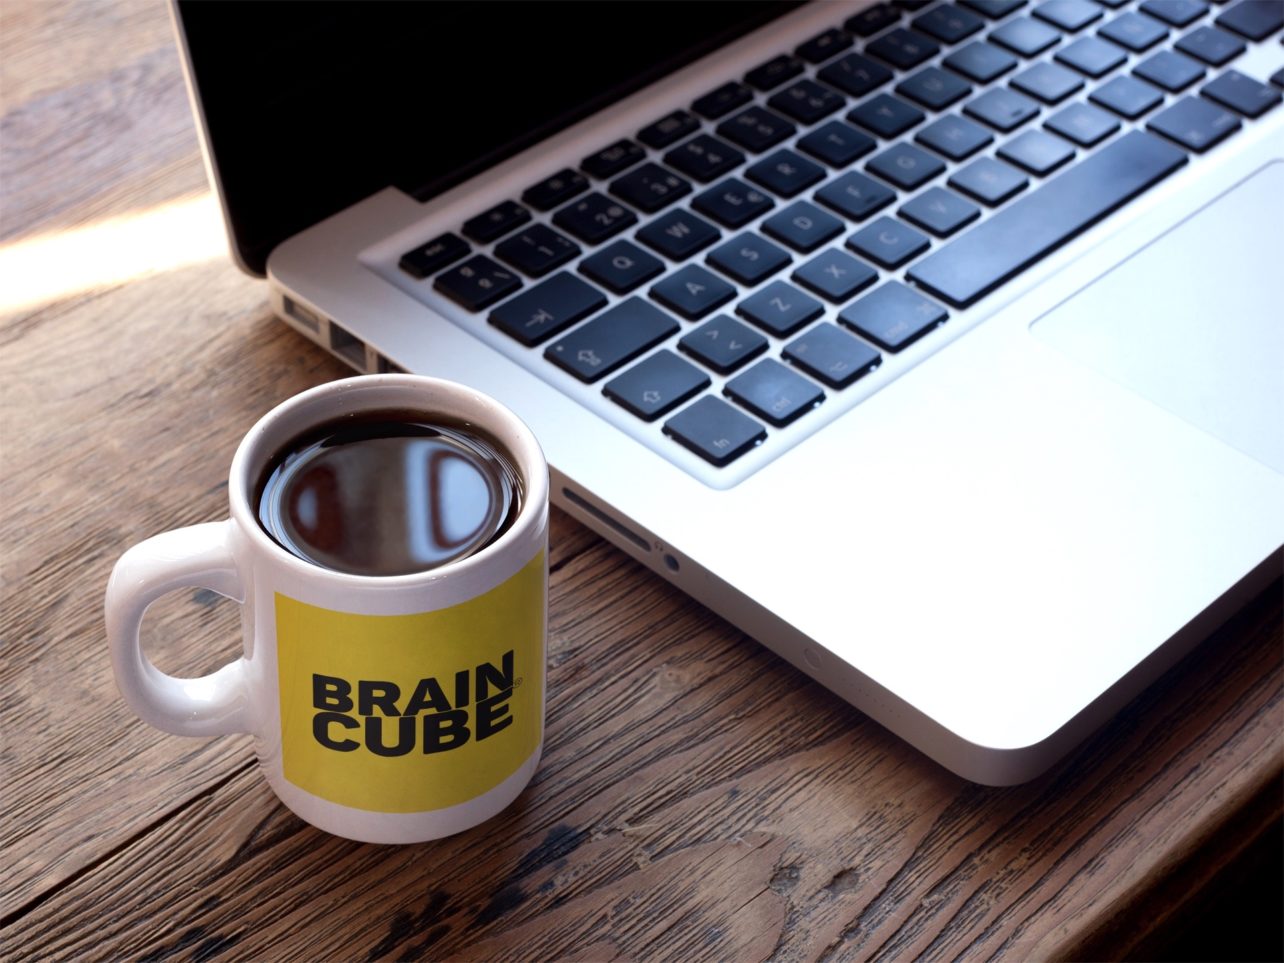 Cup of coffee with Braincube logo next to laptop